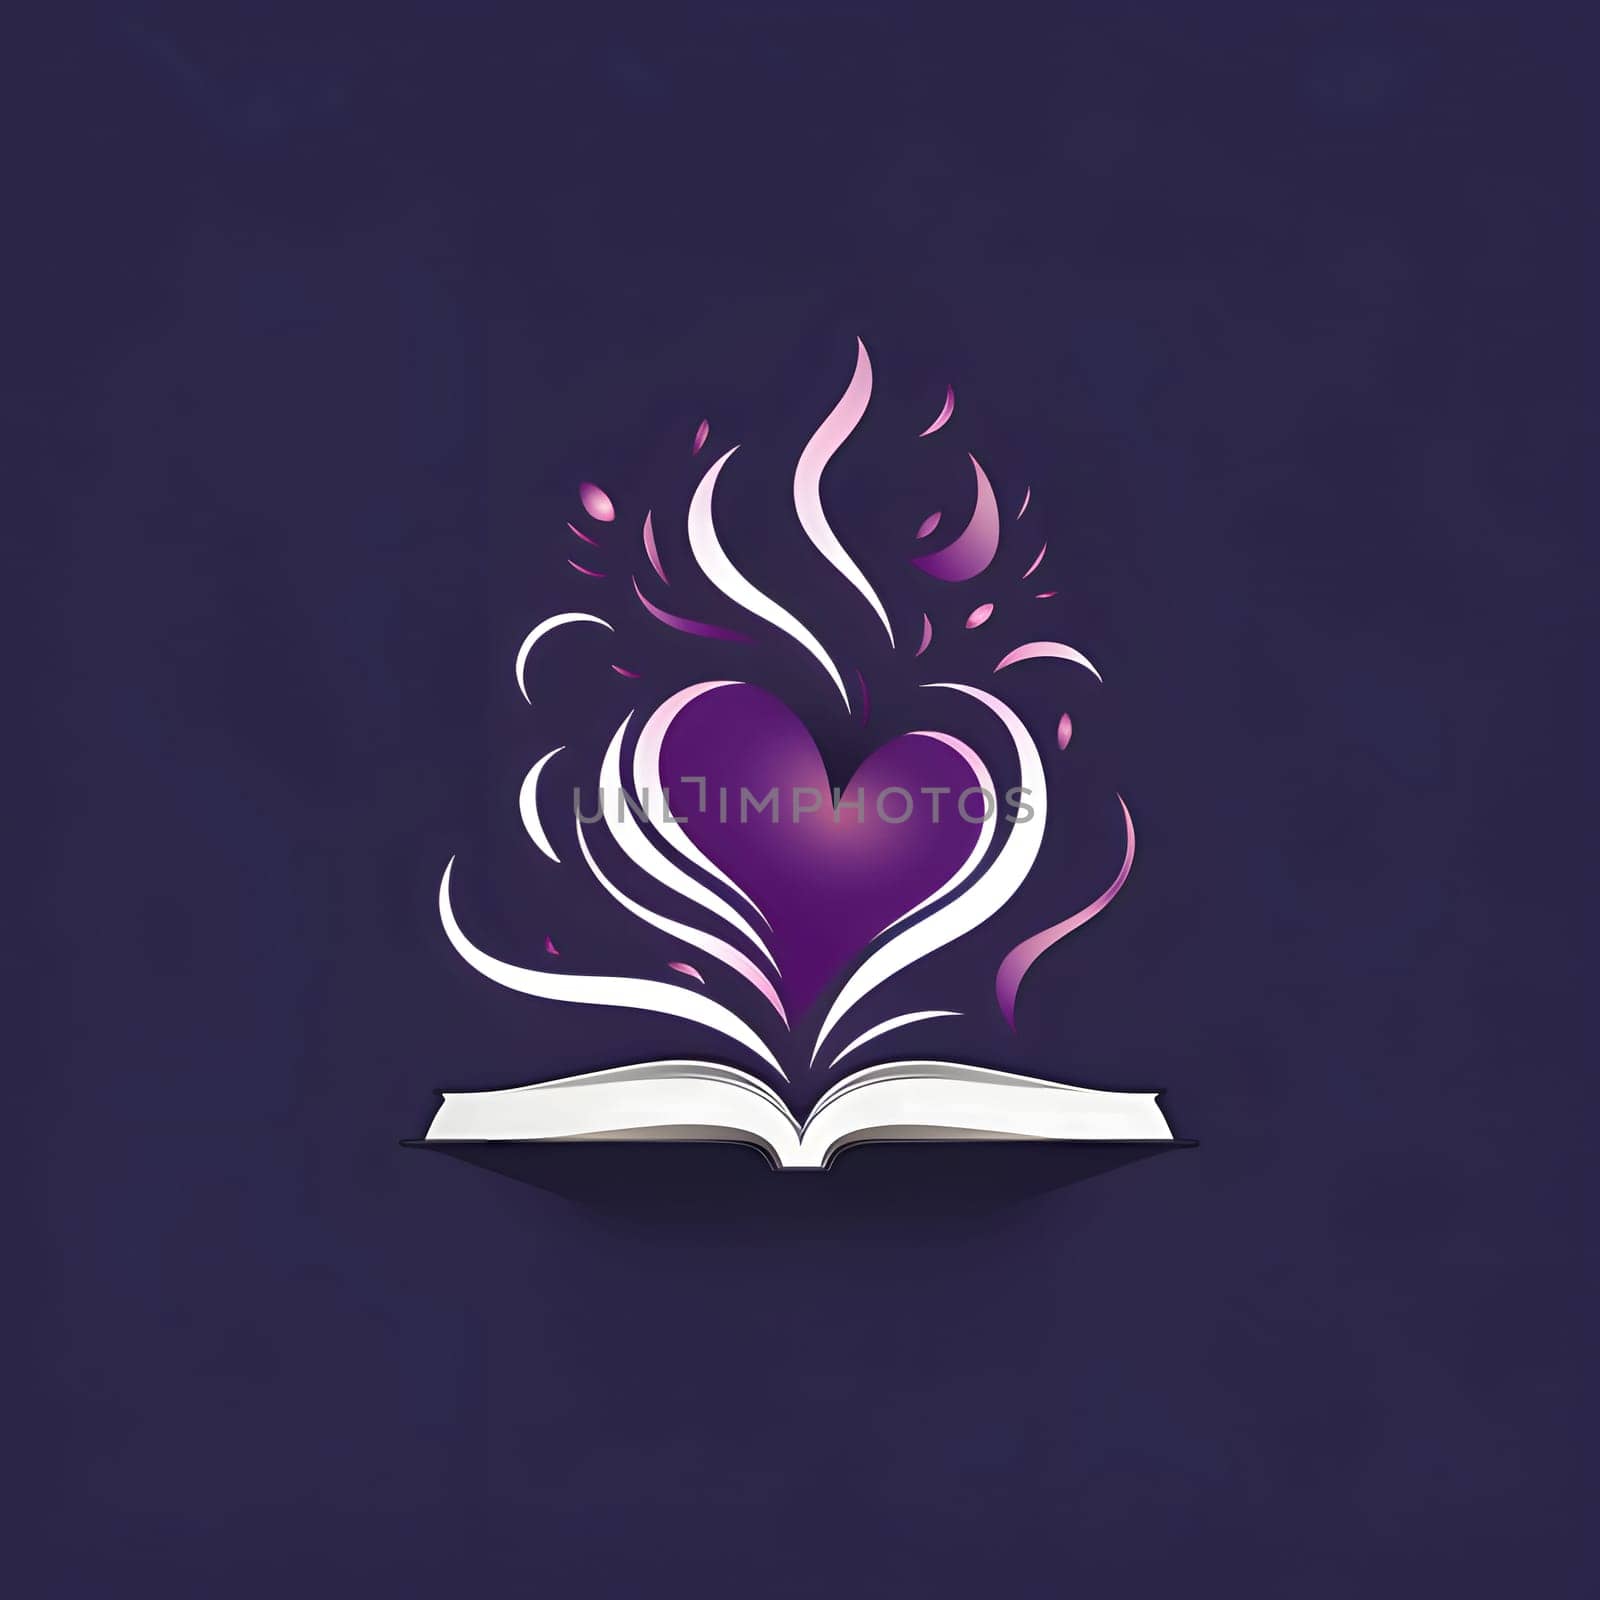 Logo concept abstract heart in white flames over book dark background. Heart as a symbol of affection and love. The time of falling in love and love.